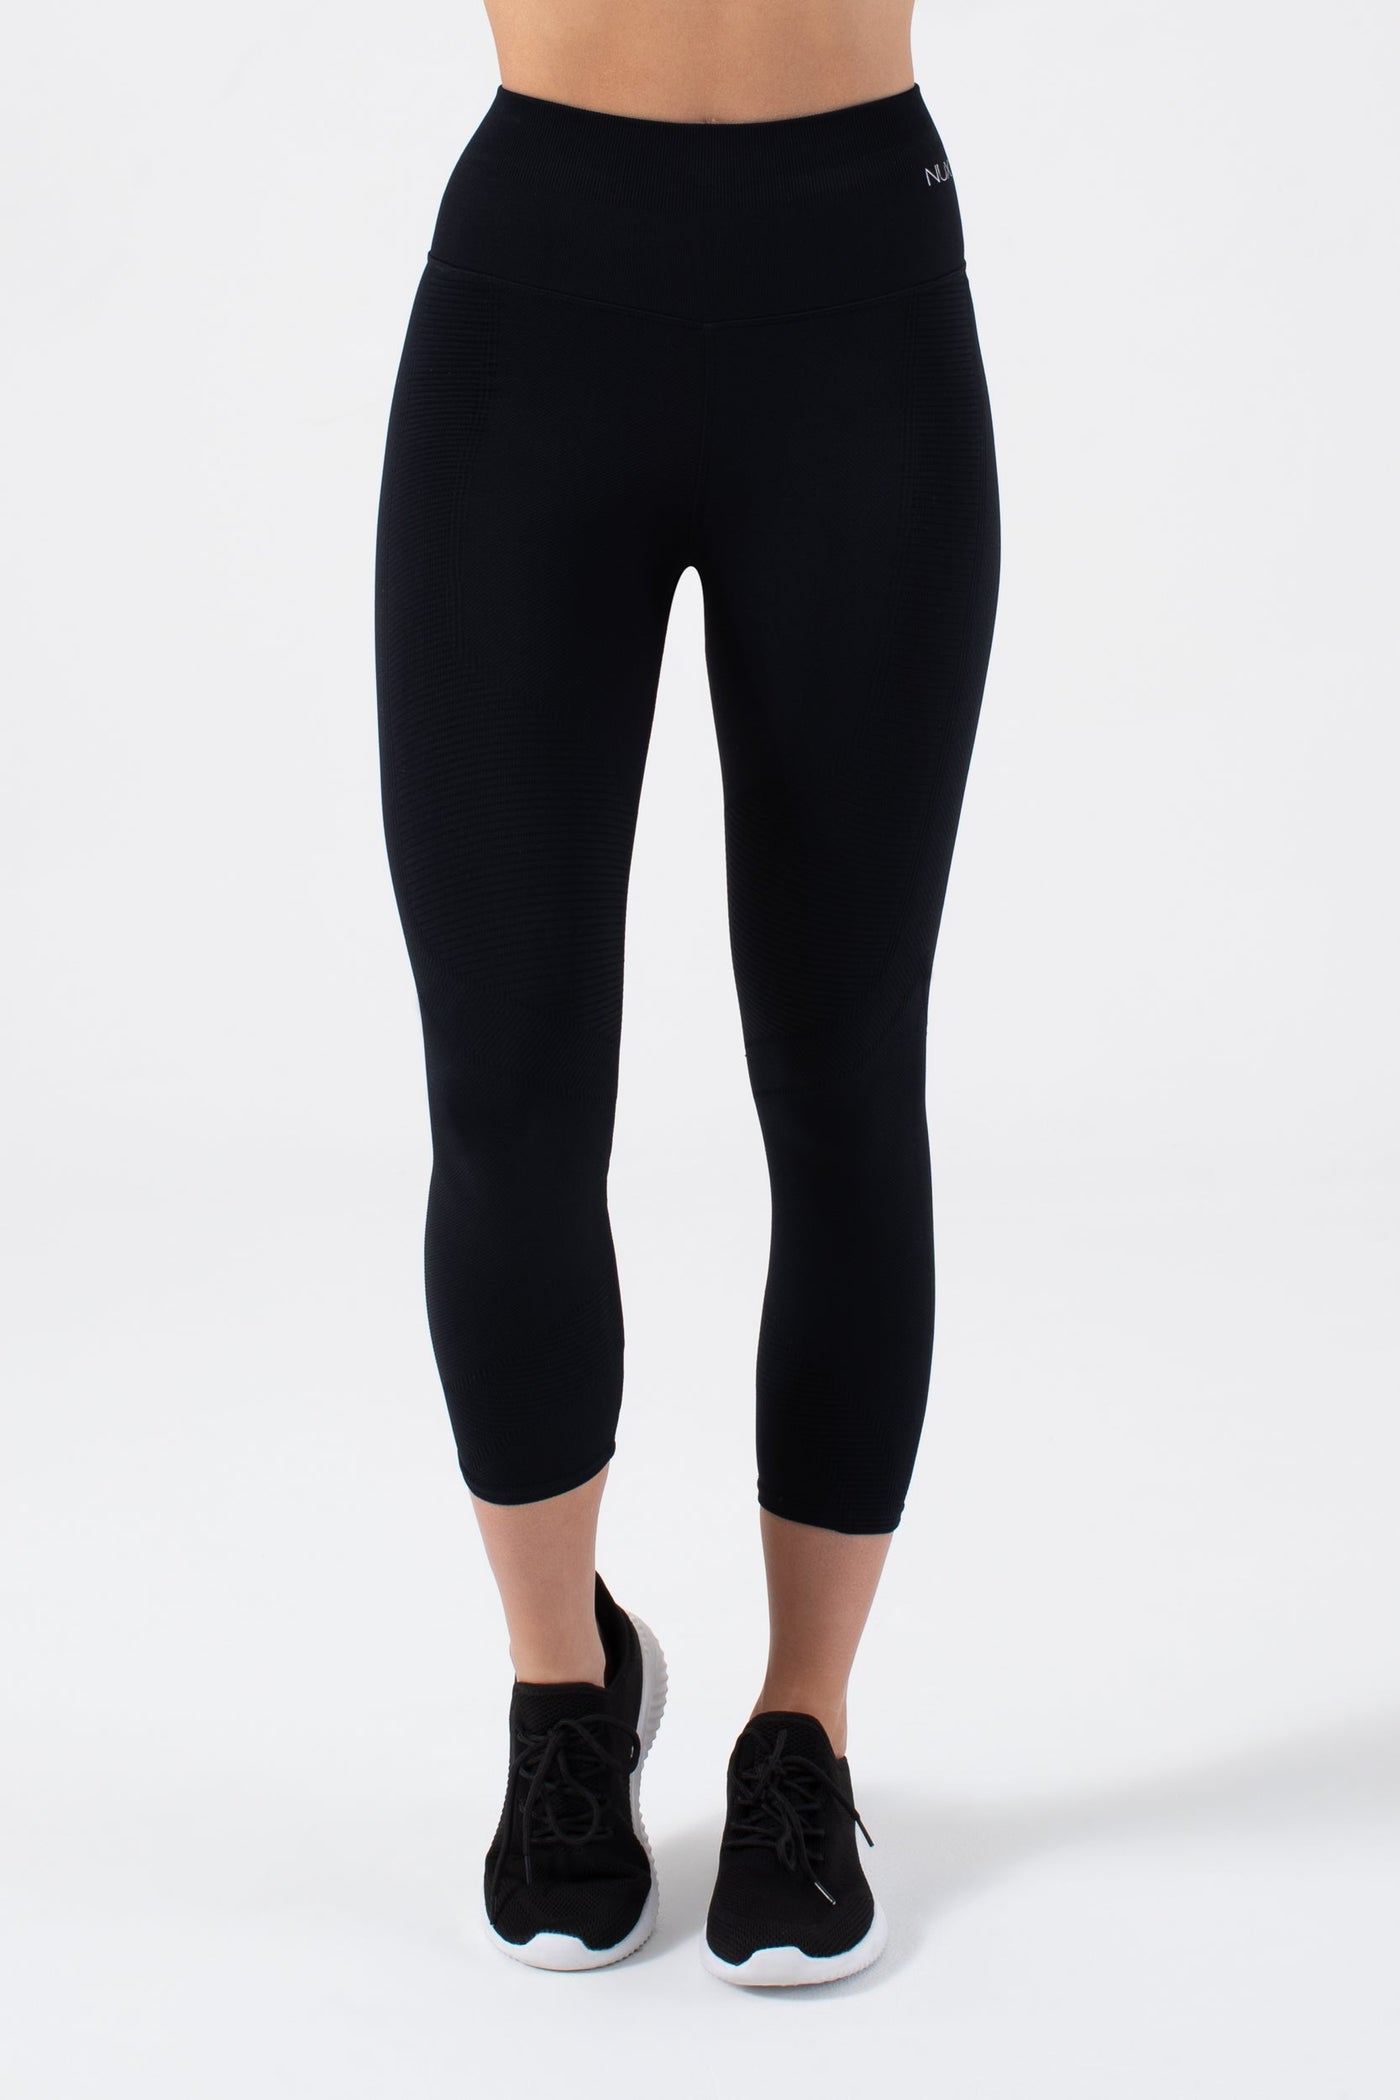 Body Engineered® One By One 7/8 Legging